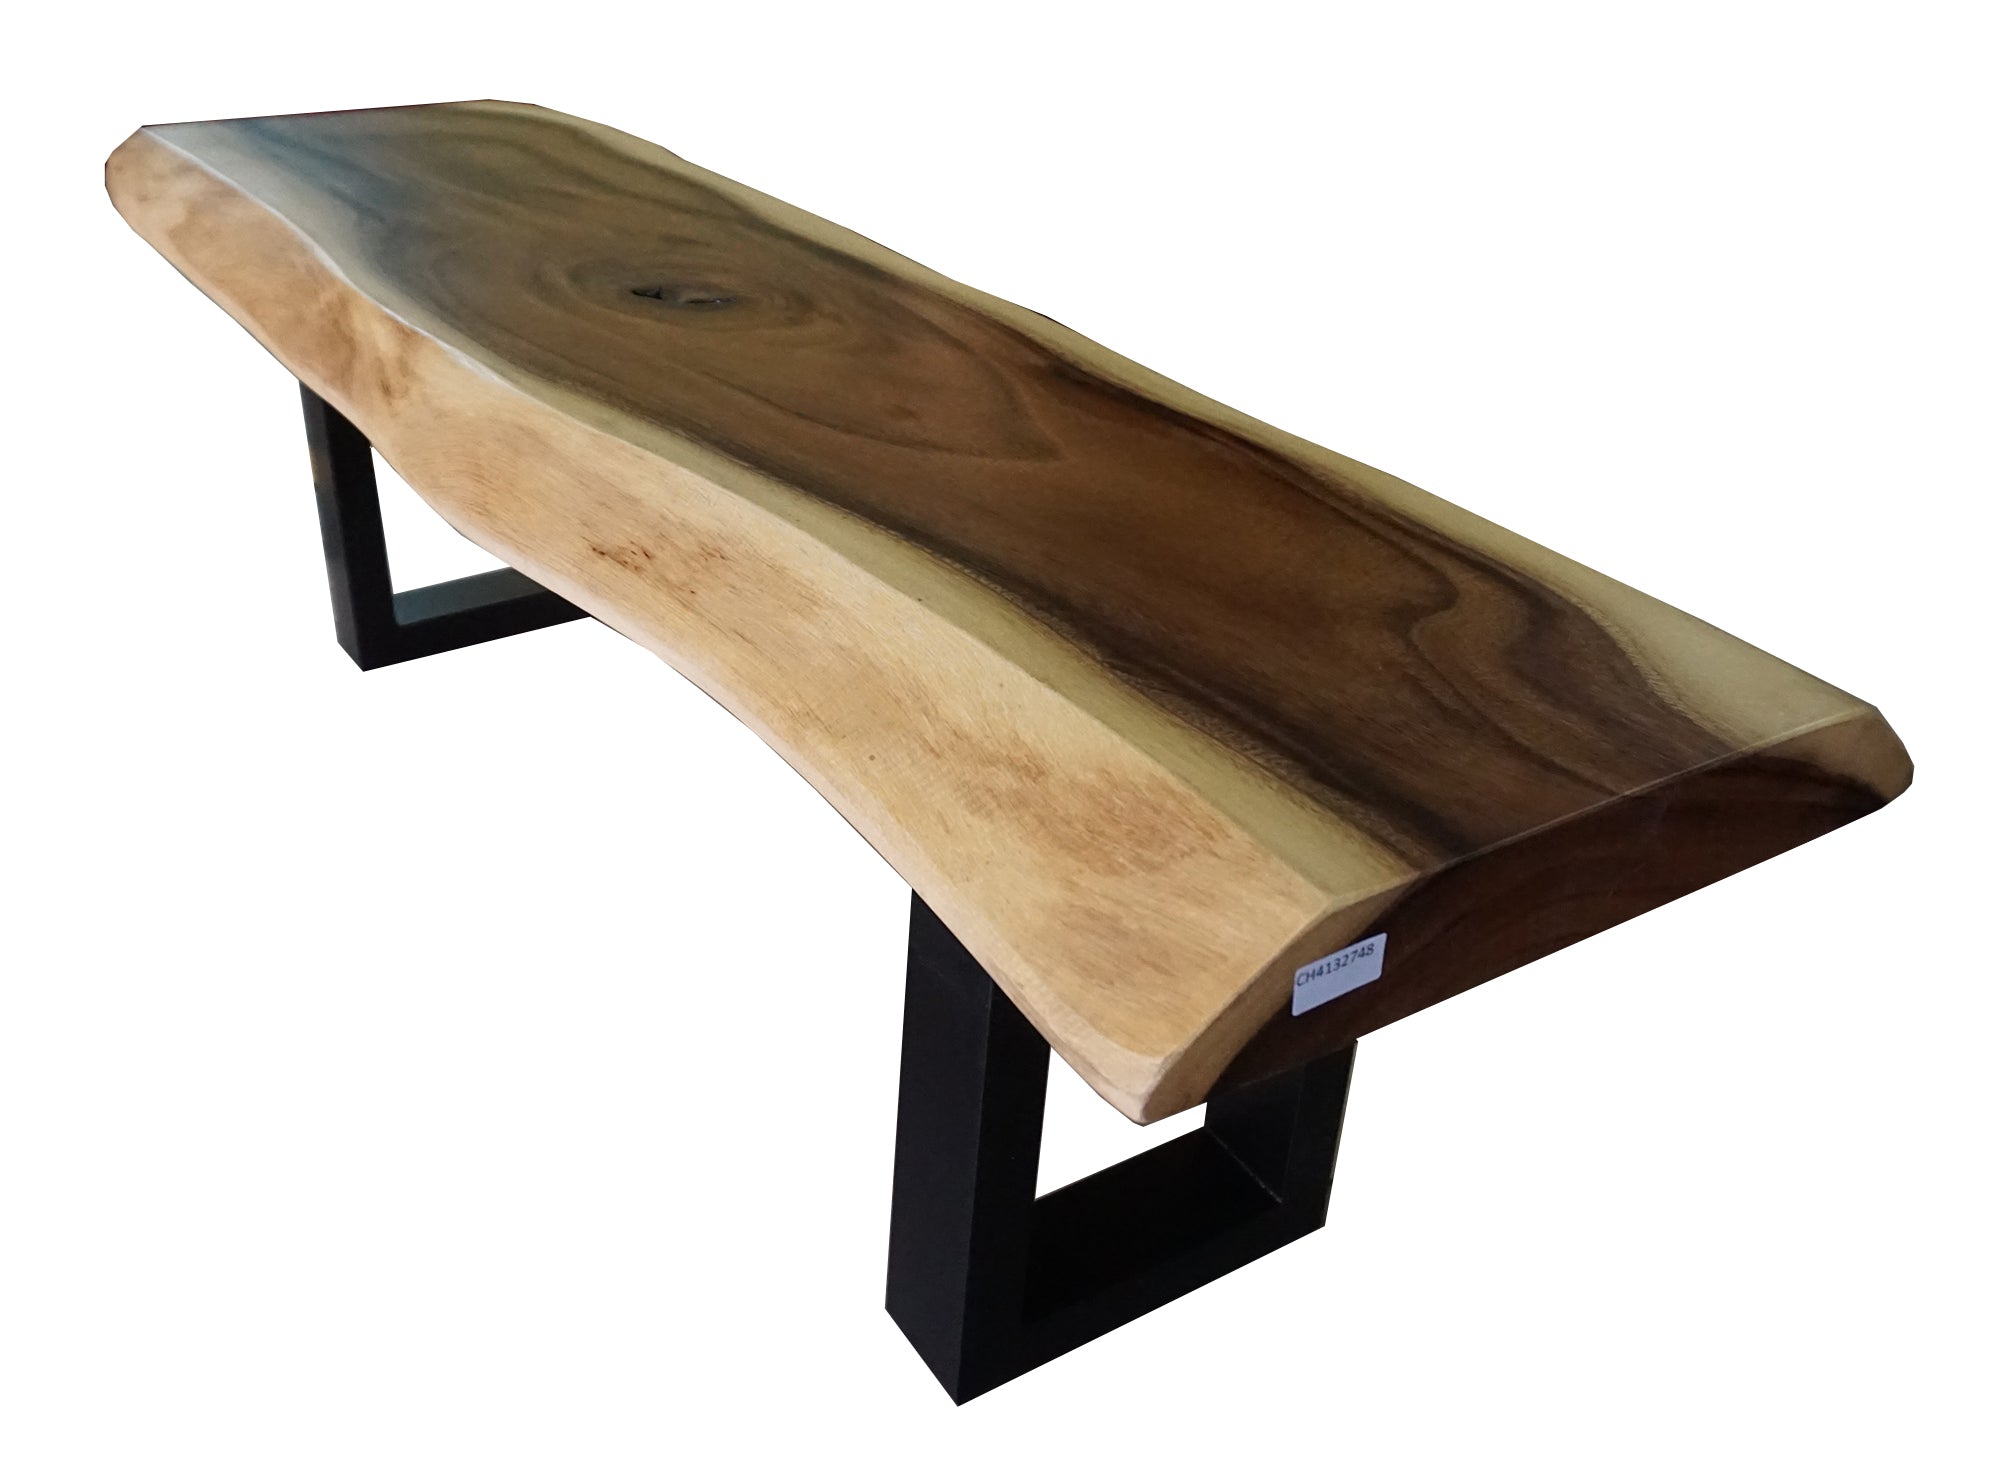 PURE - Chamcha Wood Bench with metal legs 60"